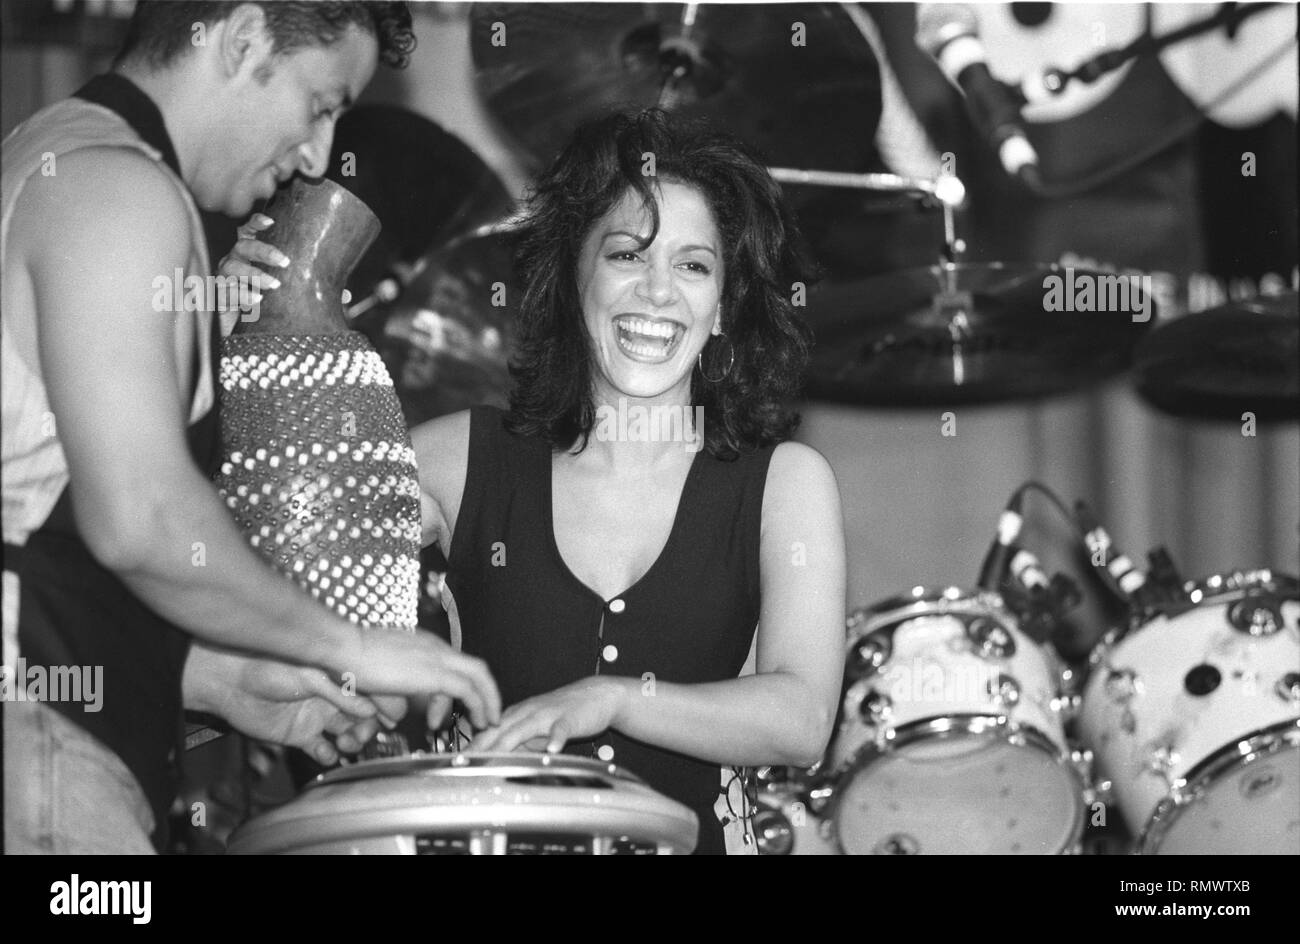 Sheila Escovedo, best known by her stage name Sheila E., is a musician, perhaps best known for her work with Prince and Ringo Starr, is shown during a percussion demonstration clinic. Stock Photo